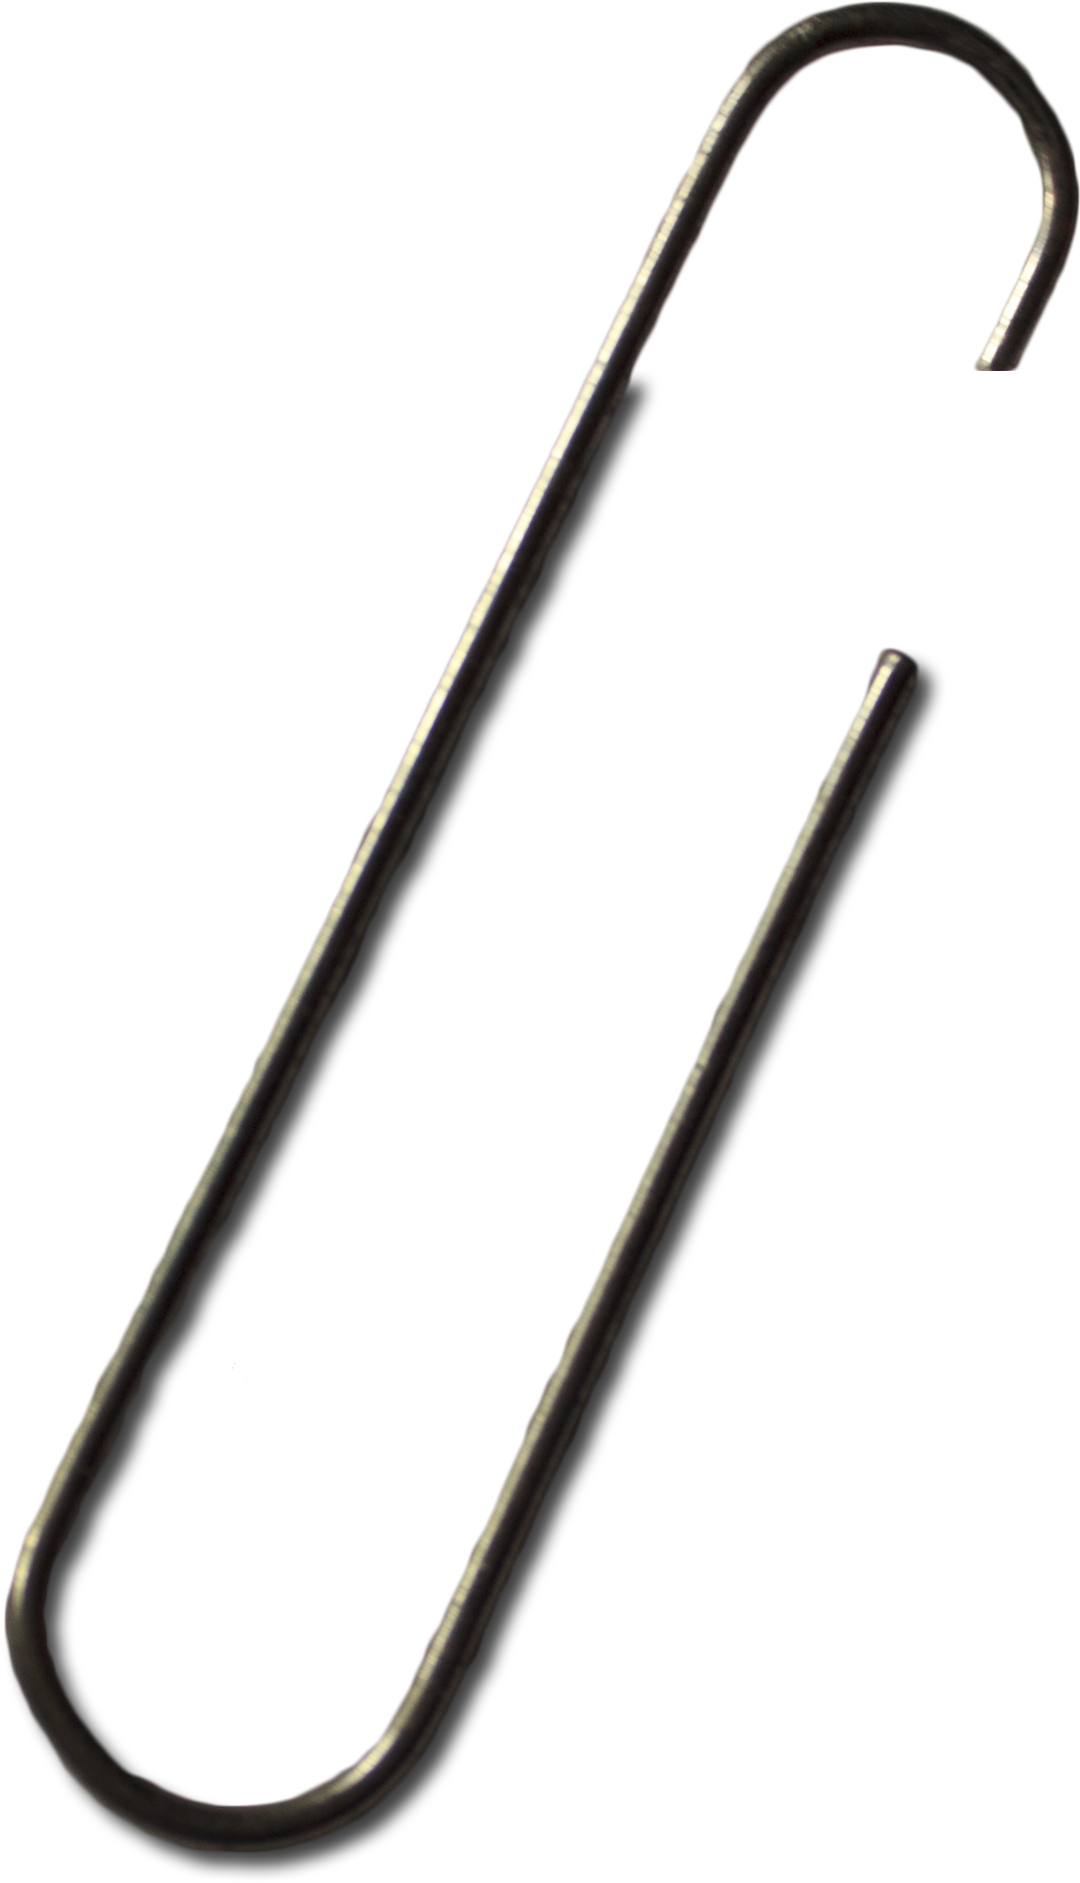 A Pair Of Long Thin Metal Rods